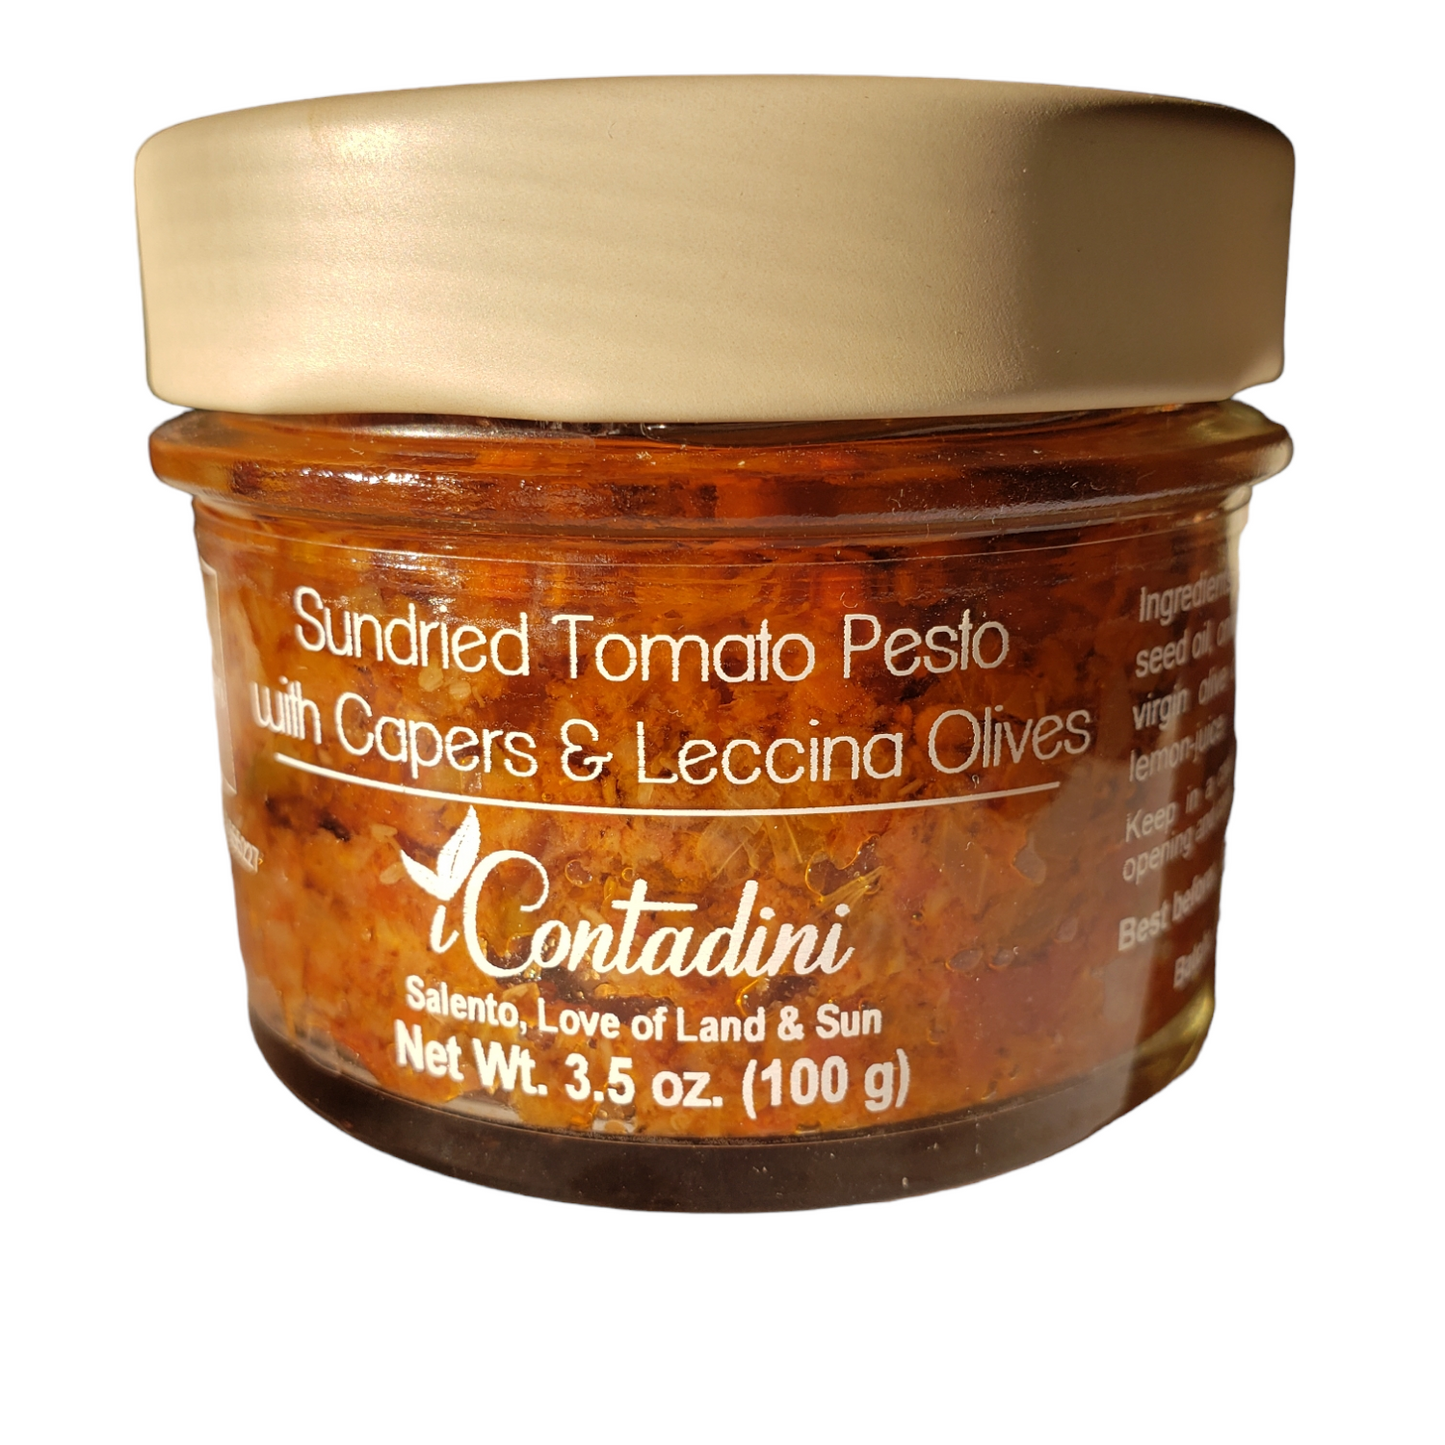 NEW SIZE! Sundried Tomato Pesto with Capers & "Leccina" Olives by I Contadini, 3.5 oz, 6/CS